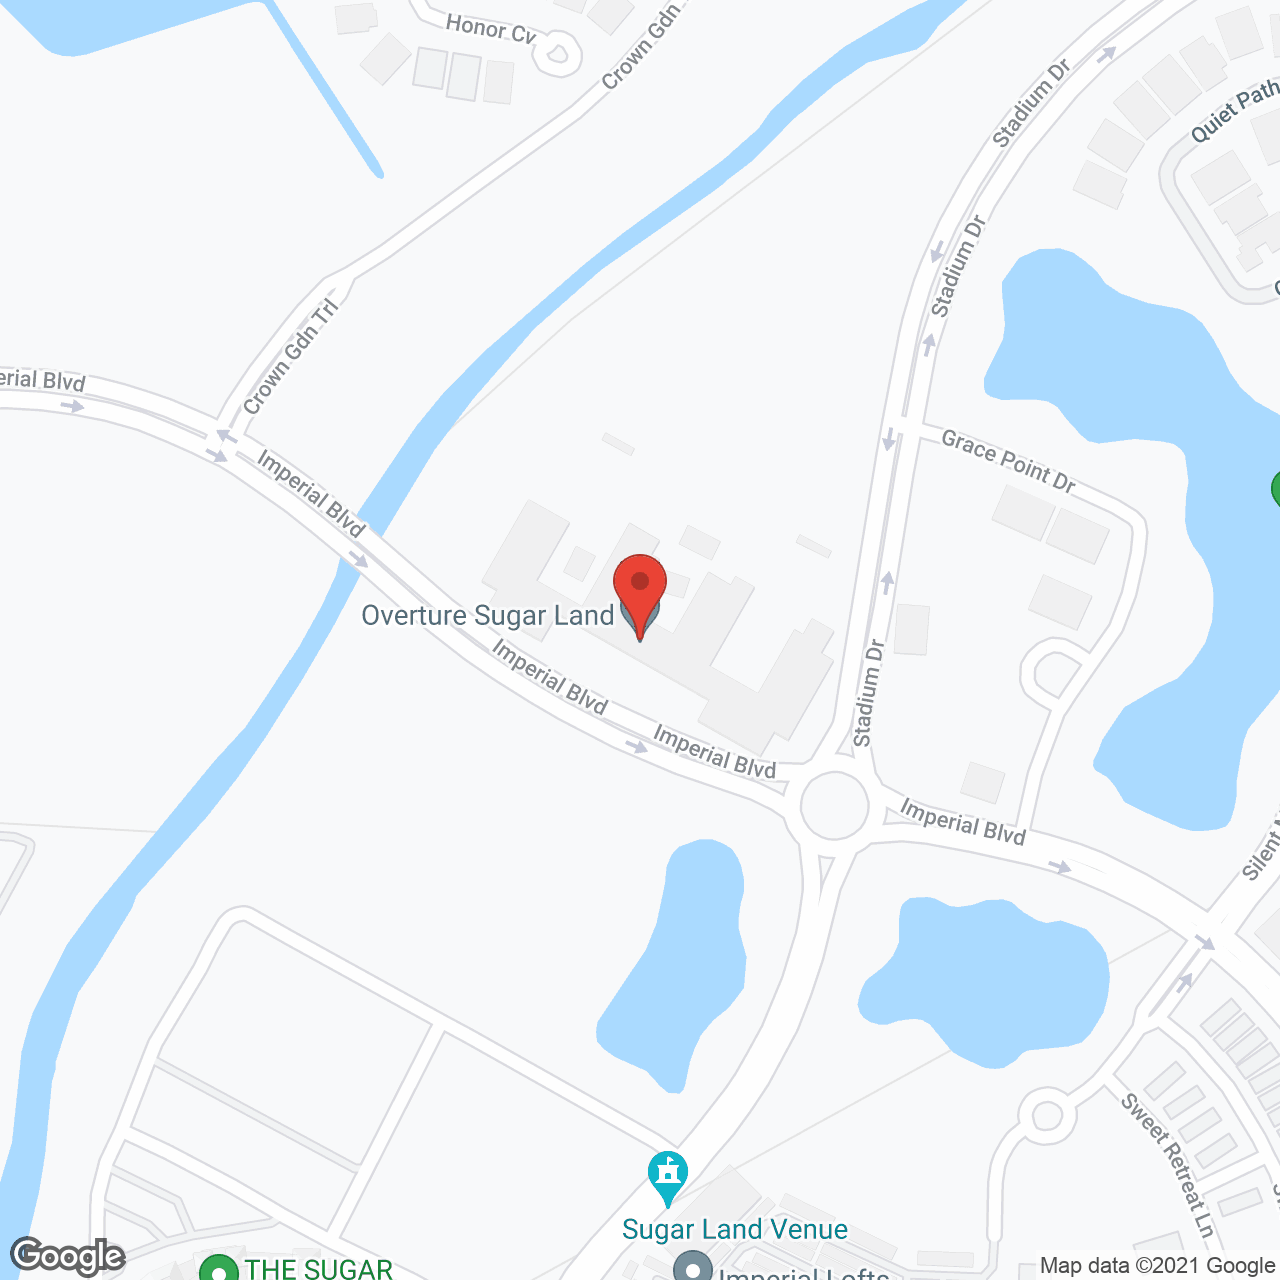 Overture Sugar Land 55+ Active Adult Apartment Homes in google map